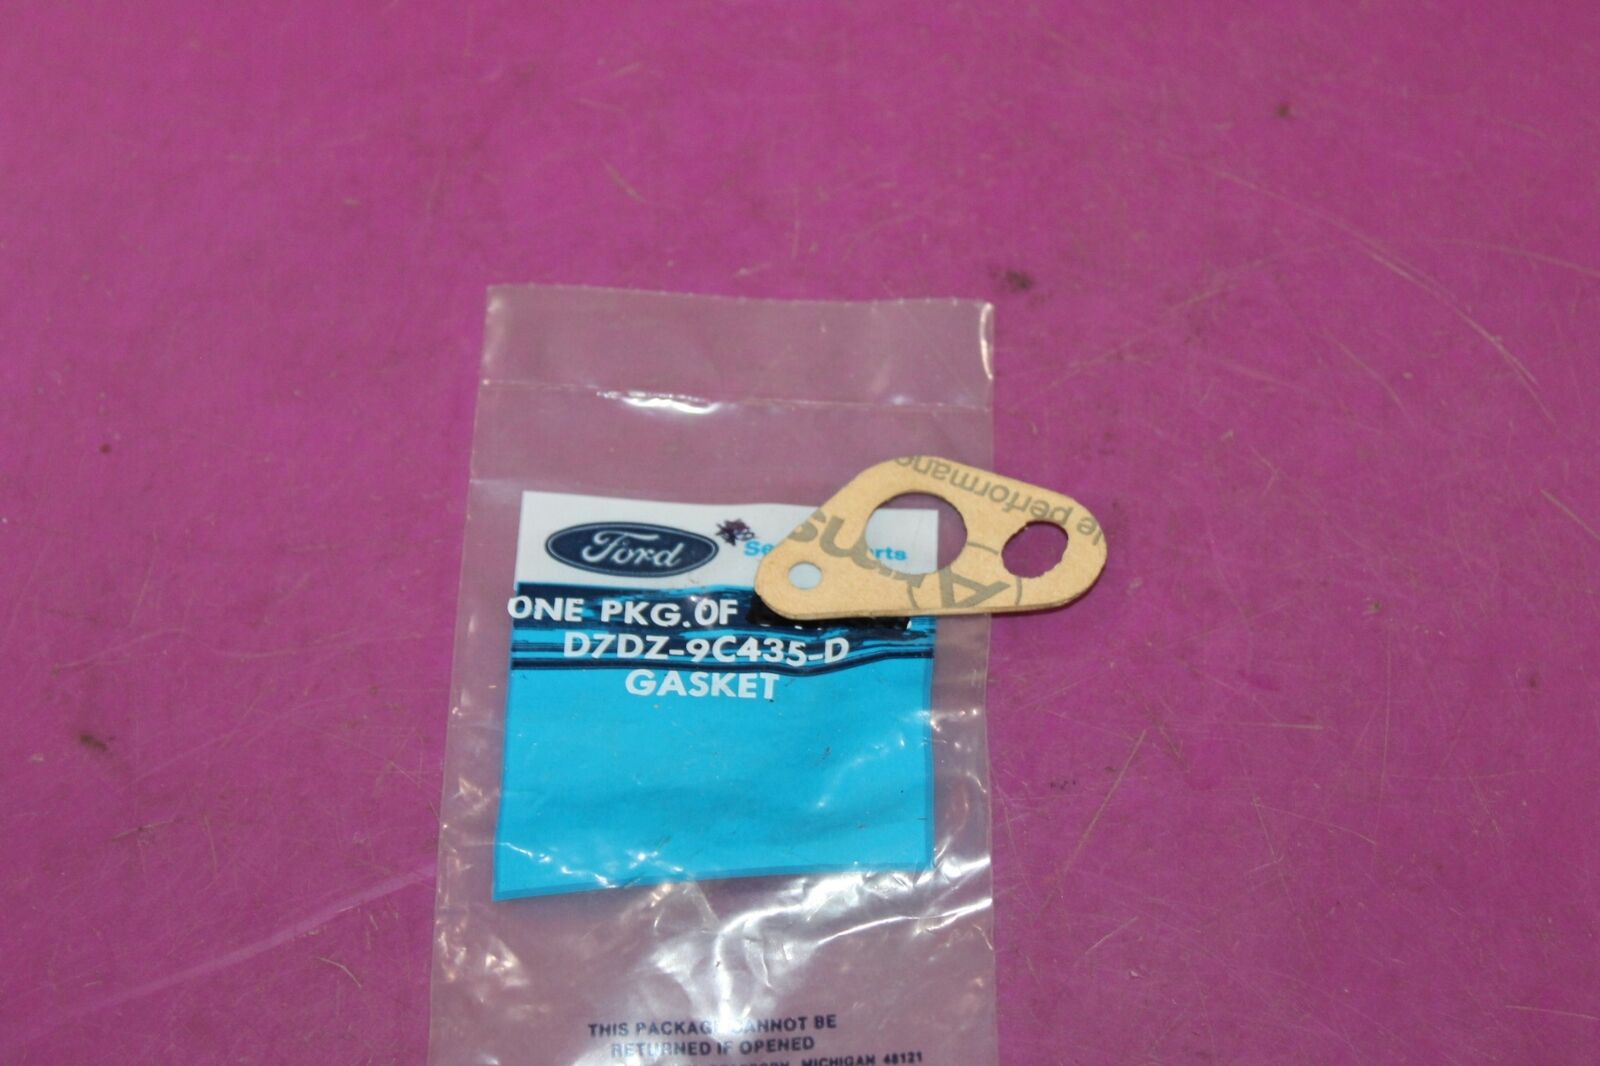 NOS Ford Gasket. Part D7DZ-9C435-D. See pic.